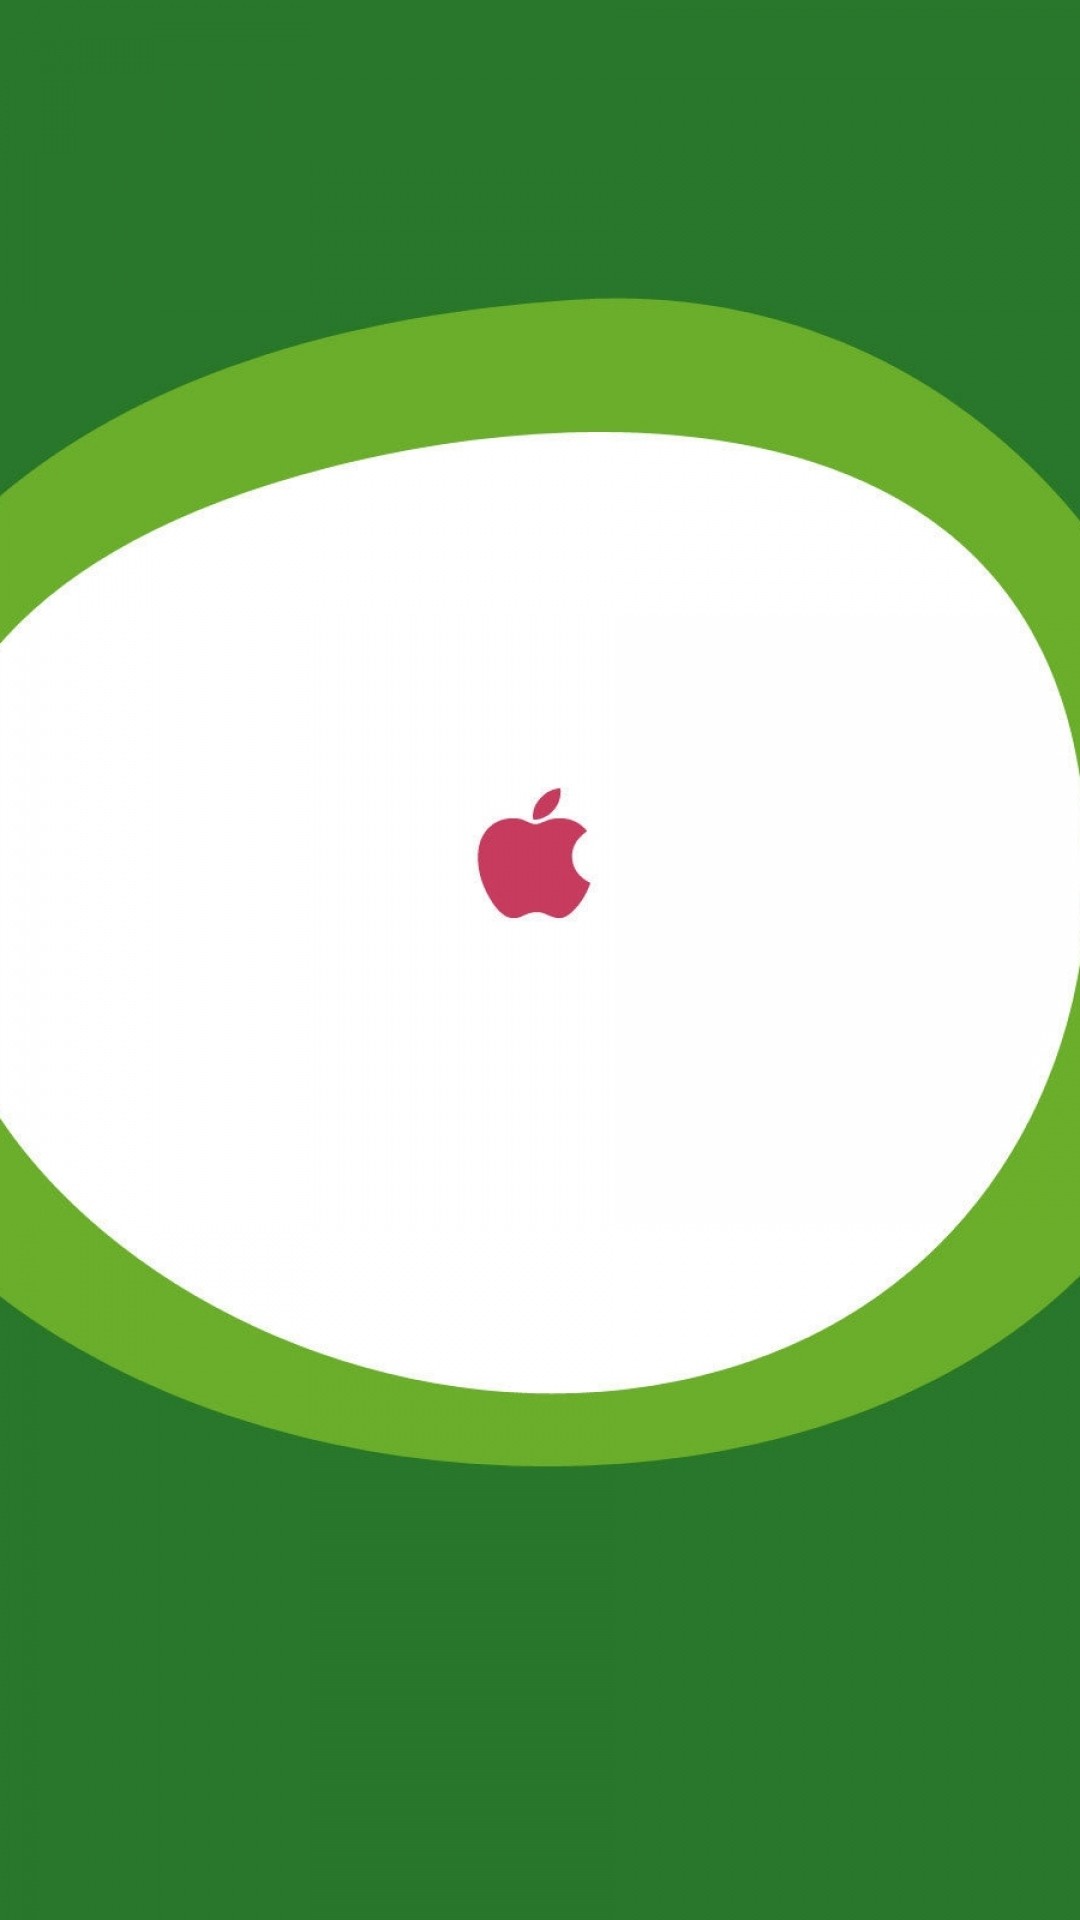 1080x1920  Wallpaper android, green, apple, pink, white